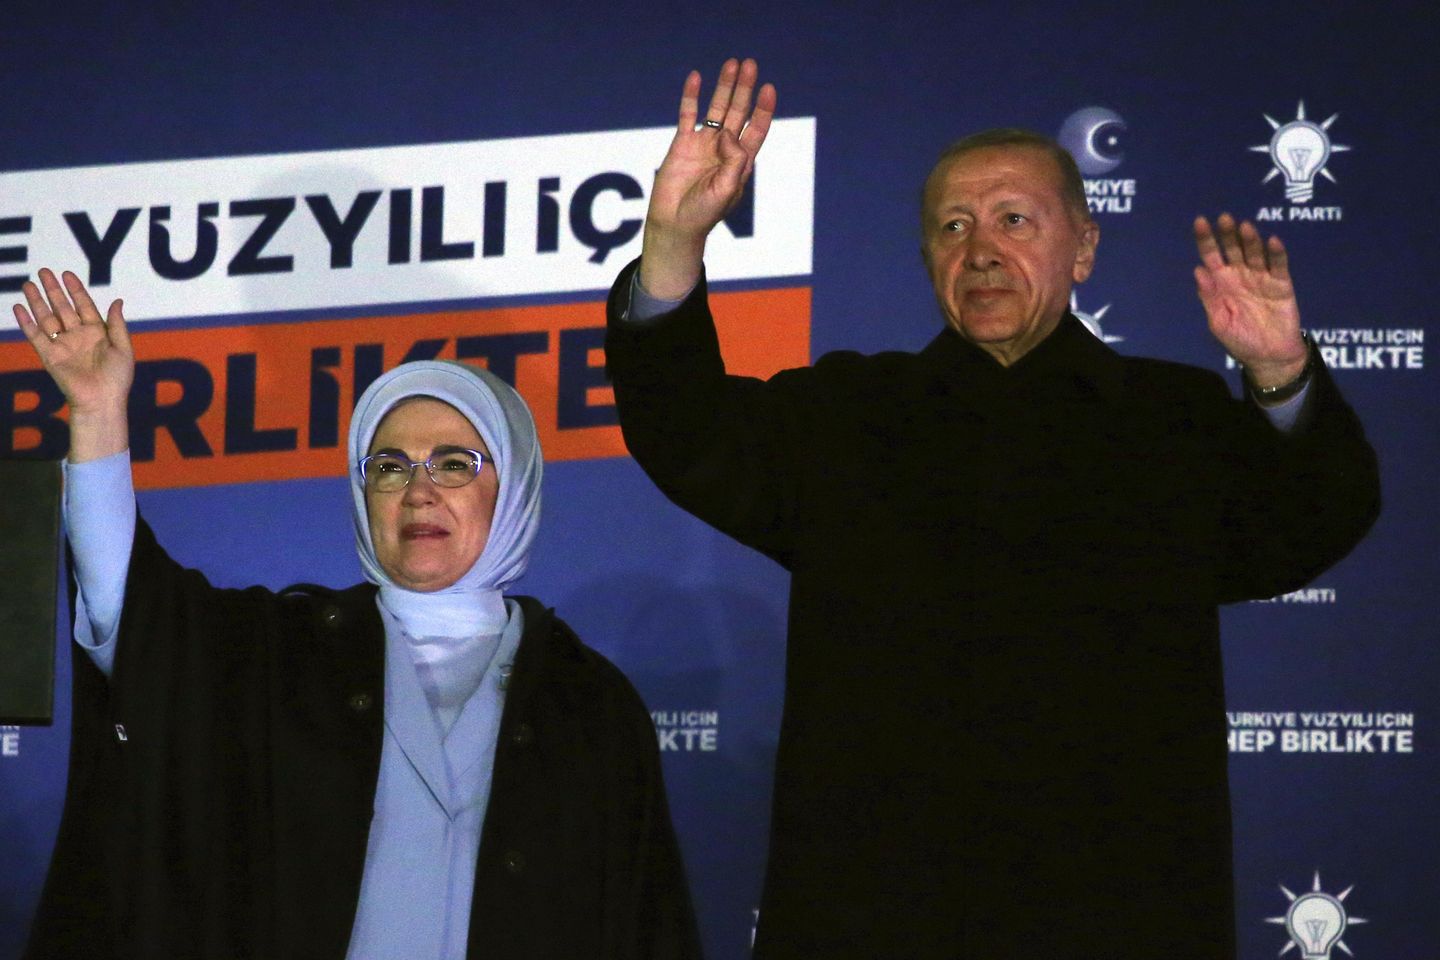 Recep Tayyip Erdogan projects confidence, despite failing to secure victory in first round